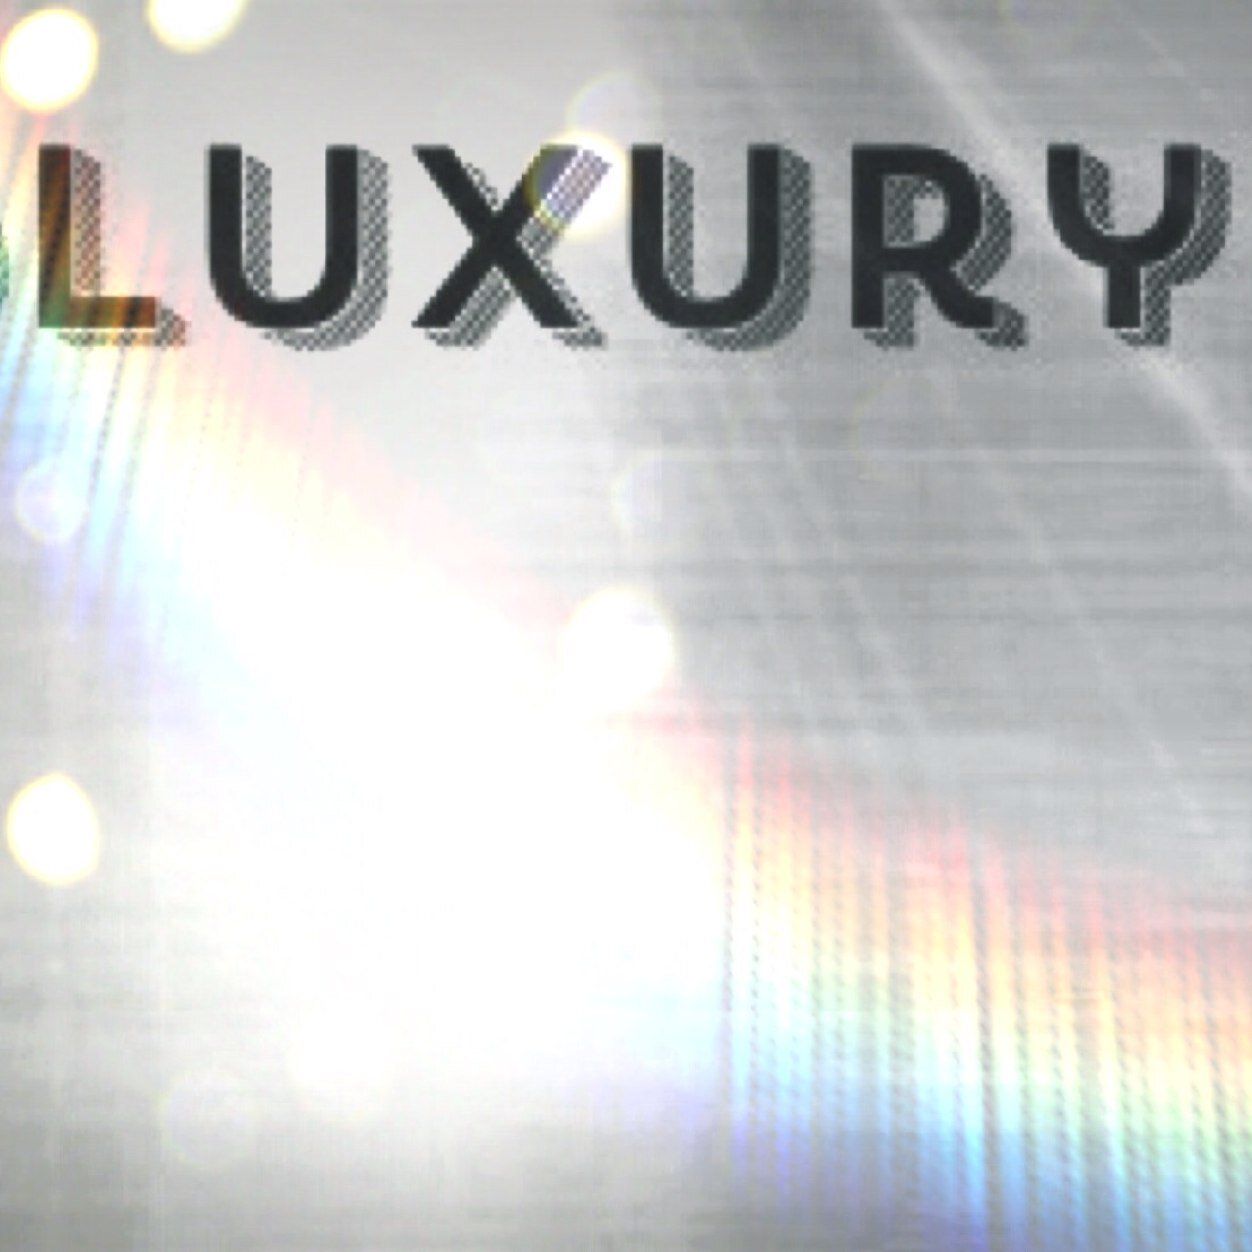 Showing Luxury Properties and Designs from the best Fashion Houses all over the world.